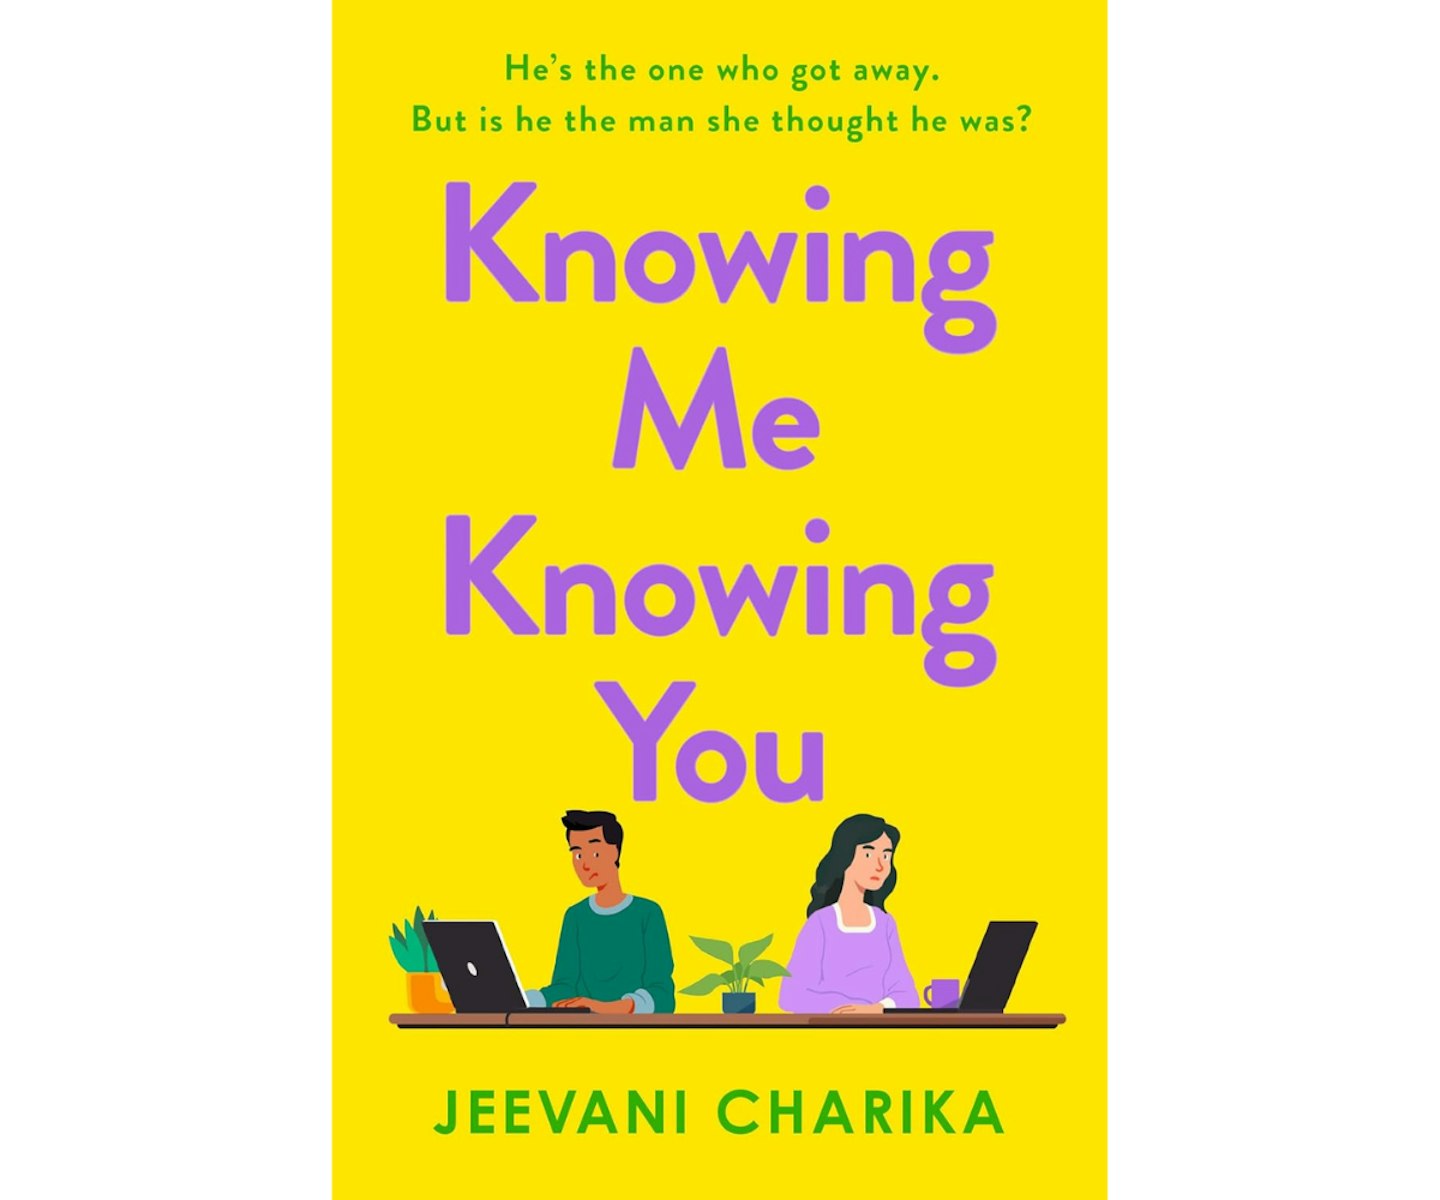 Knowing Me Knowing You by Jeevani Charika